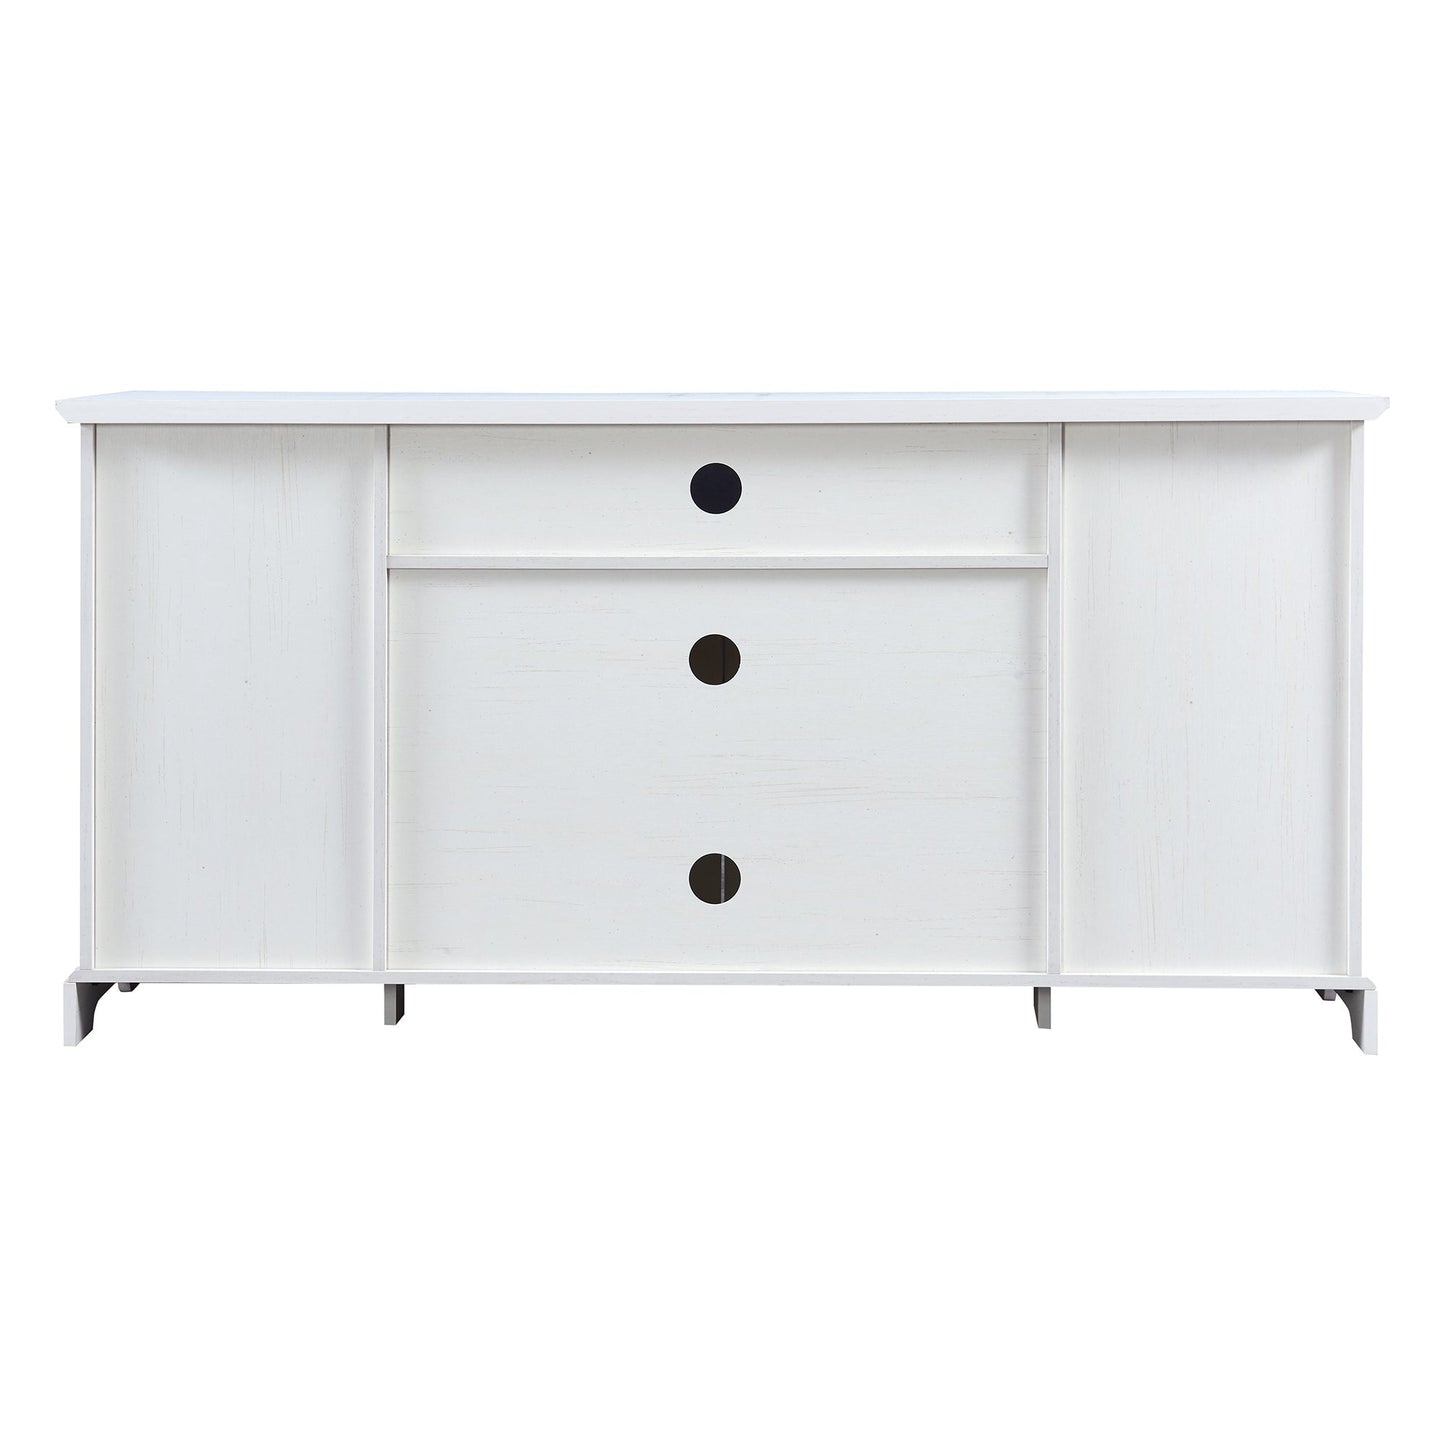 Ravenna White TV Stand for TV up to 65 in Open Style Cabinet Sideboard